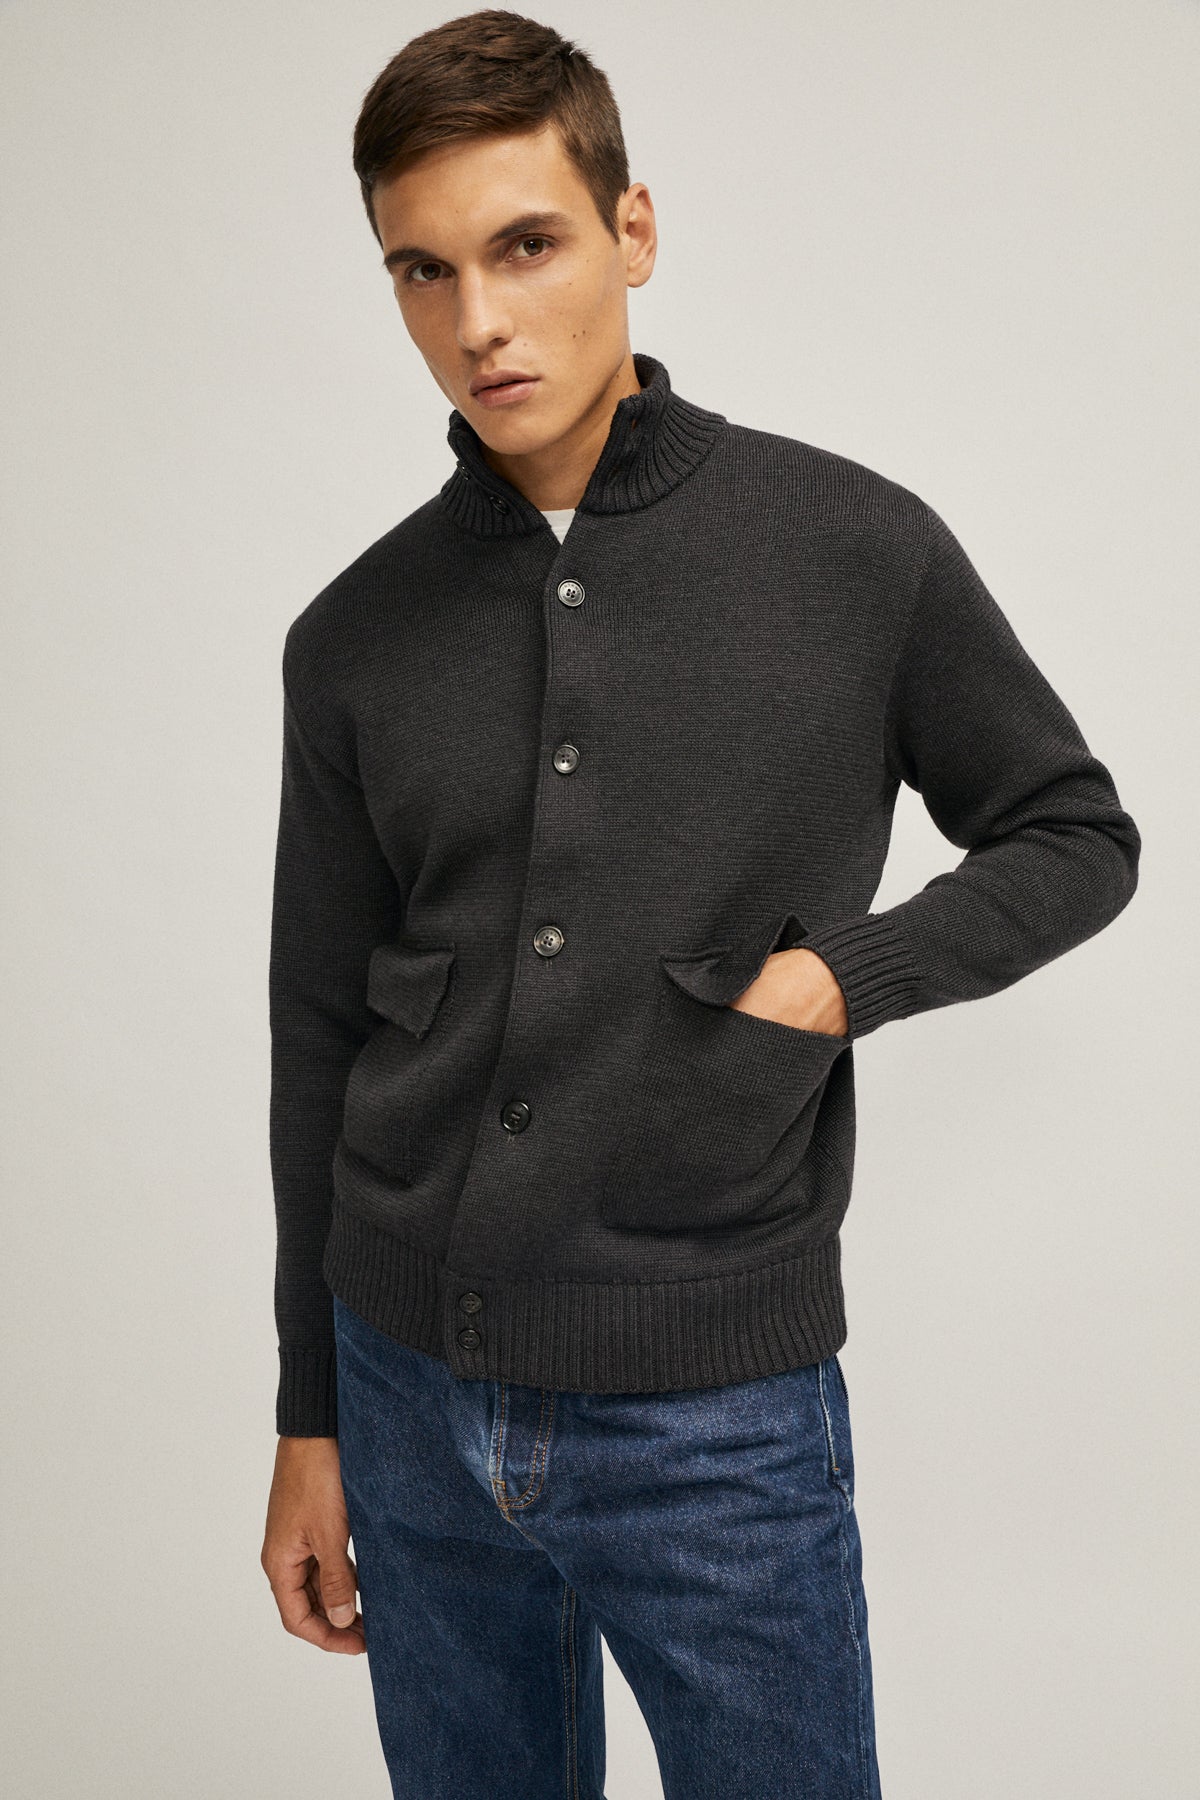 Anthracite Grey - The Merino Wool  Patch Pocket Jacket